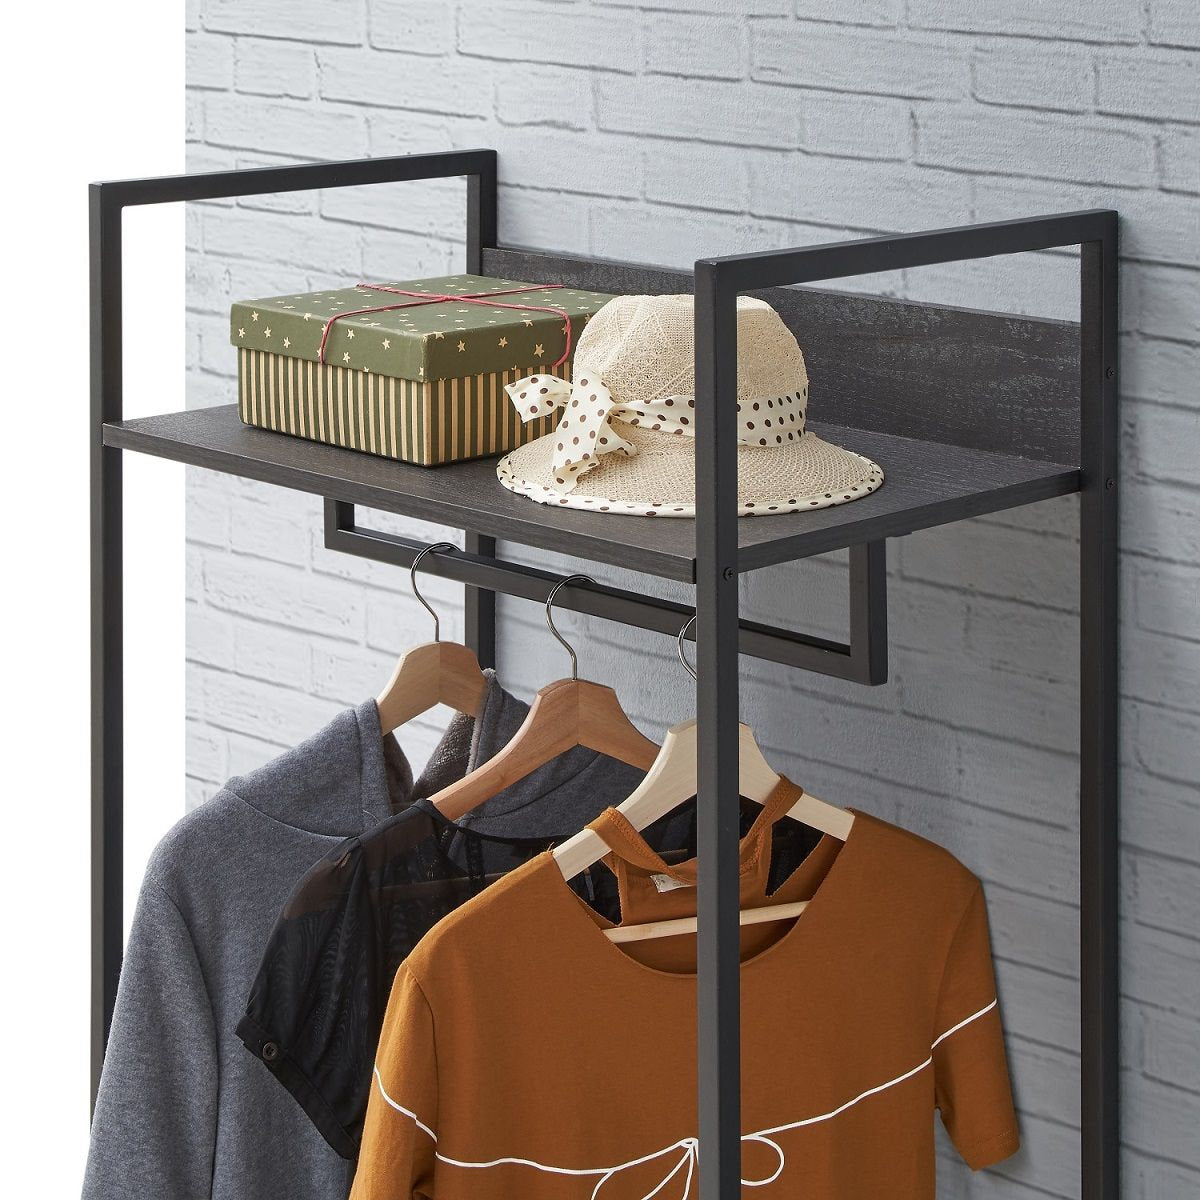 Lynx Clothing Rack with Shelves